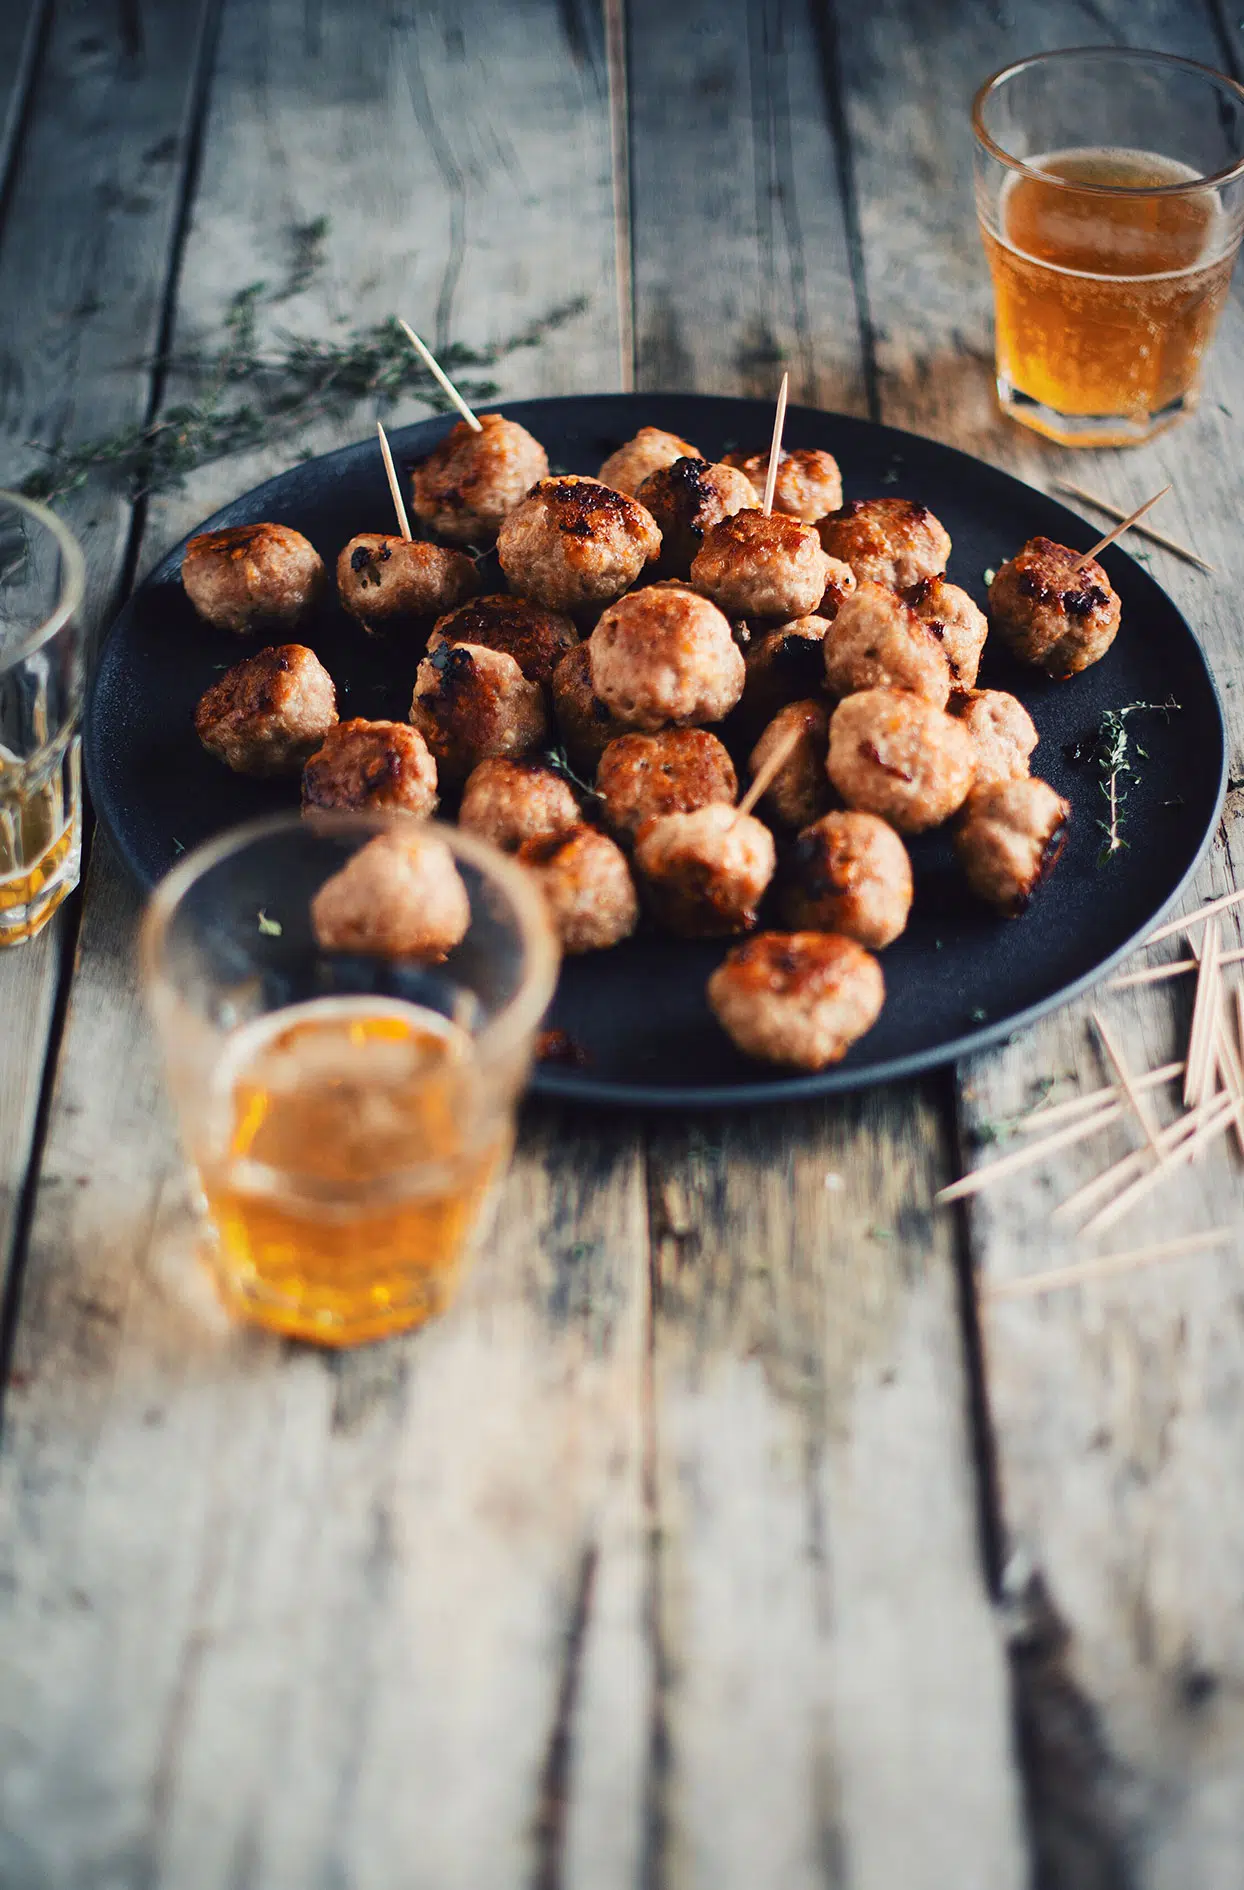 Cheesy pork meatballs with blond beer